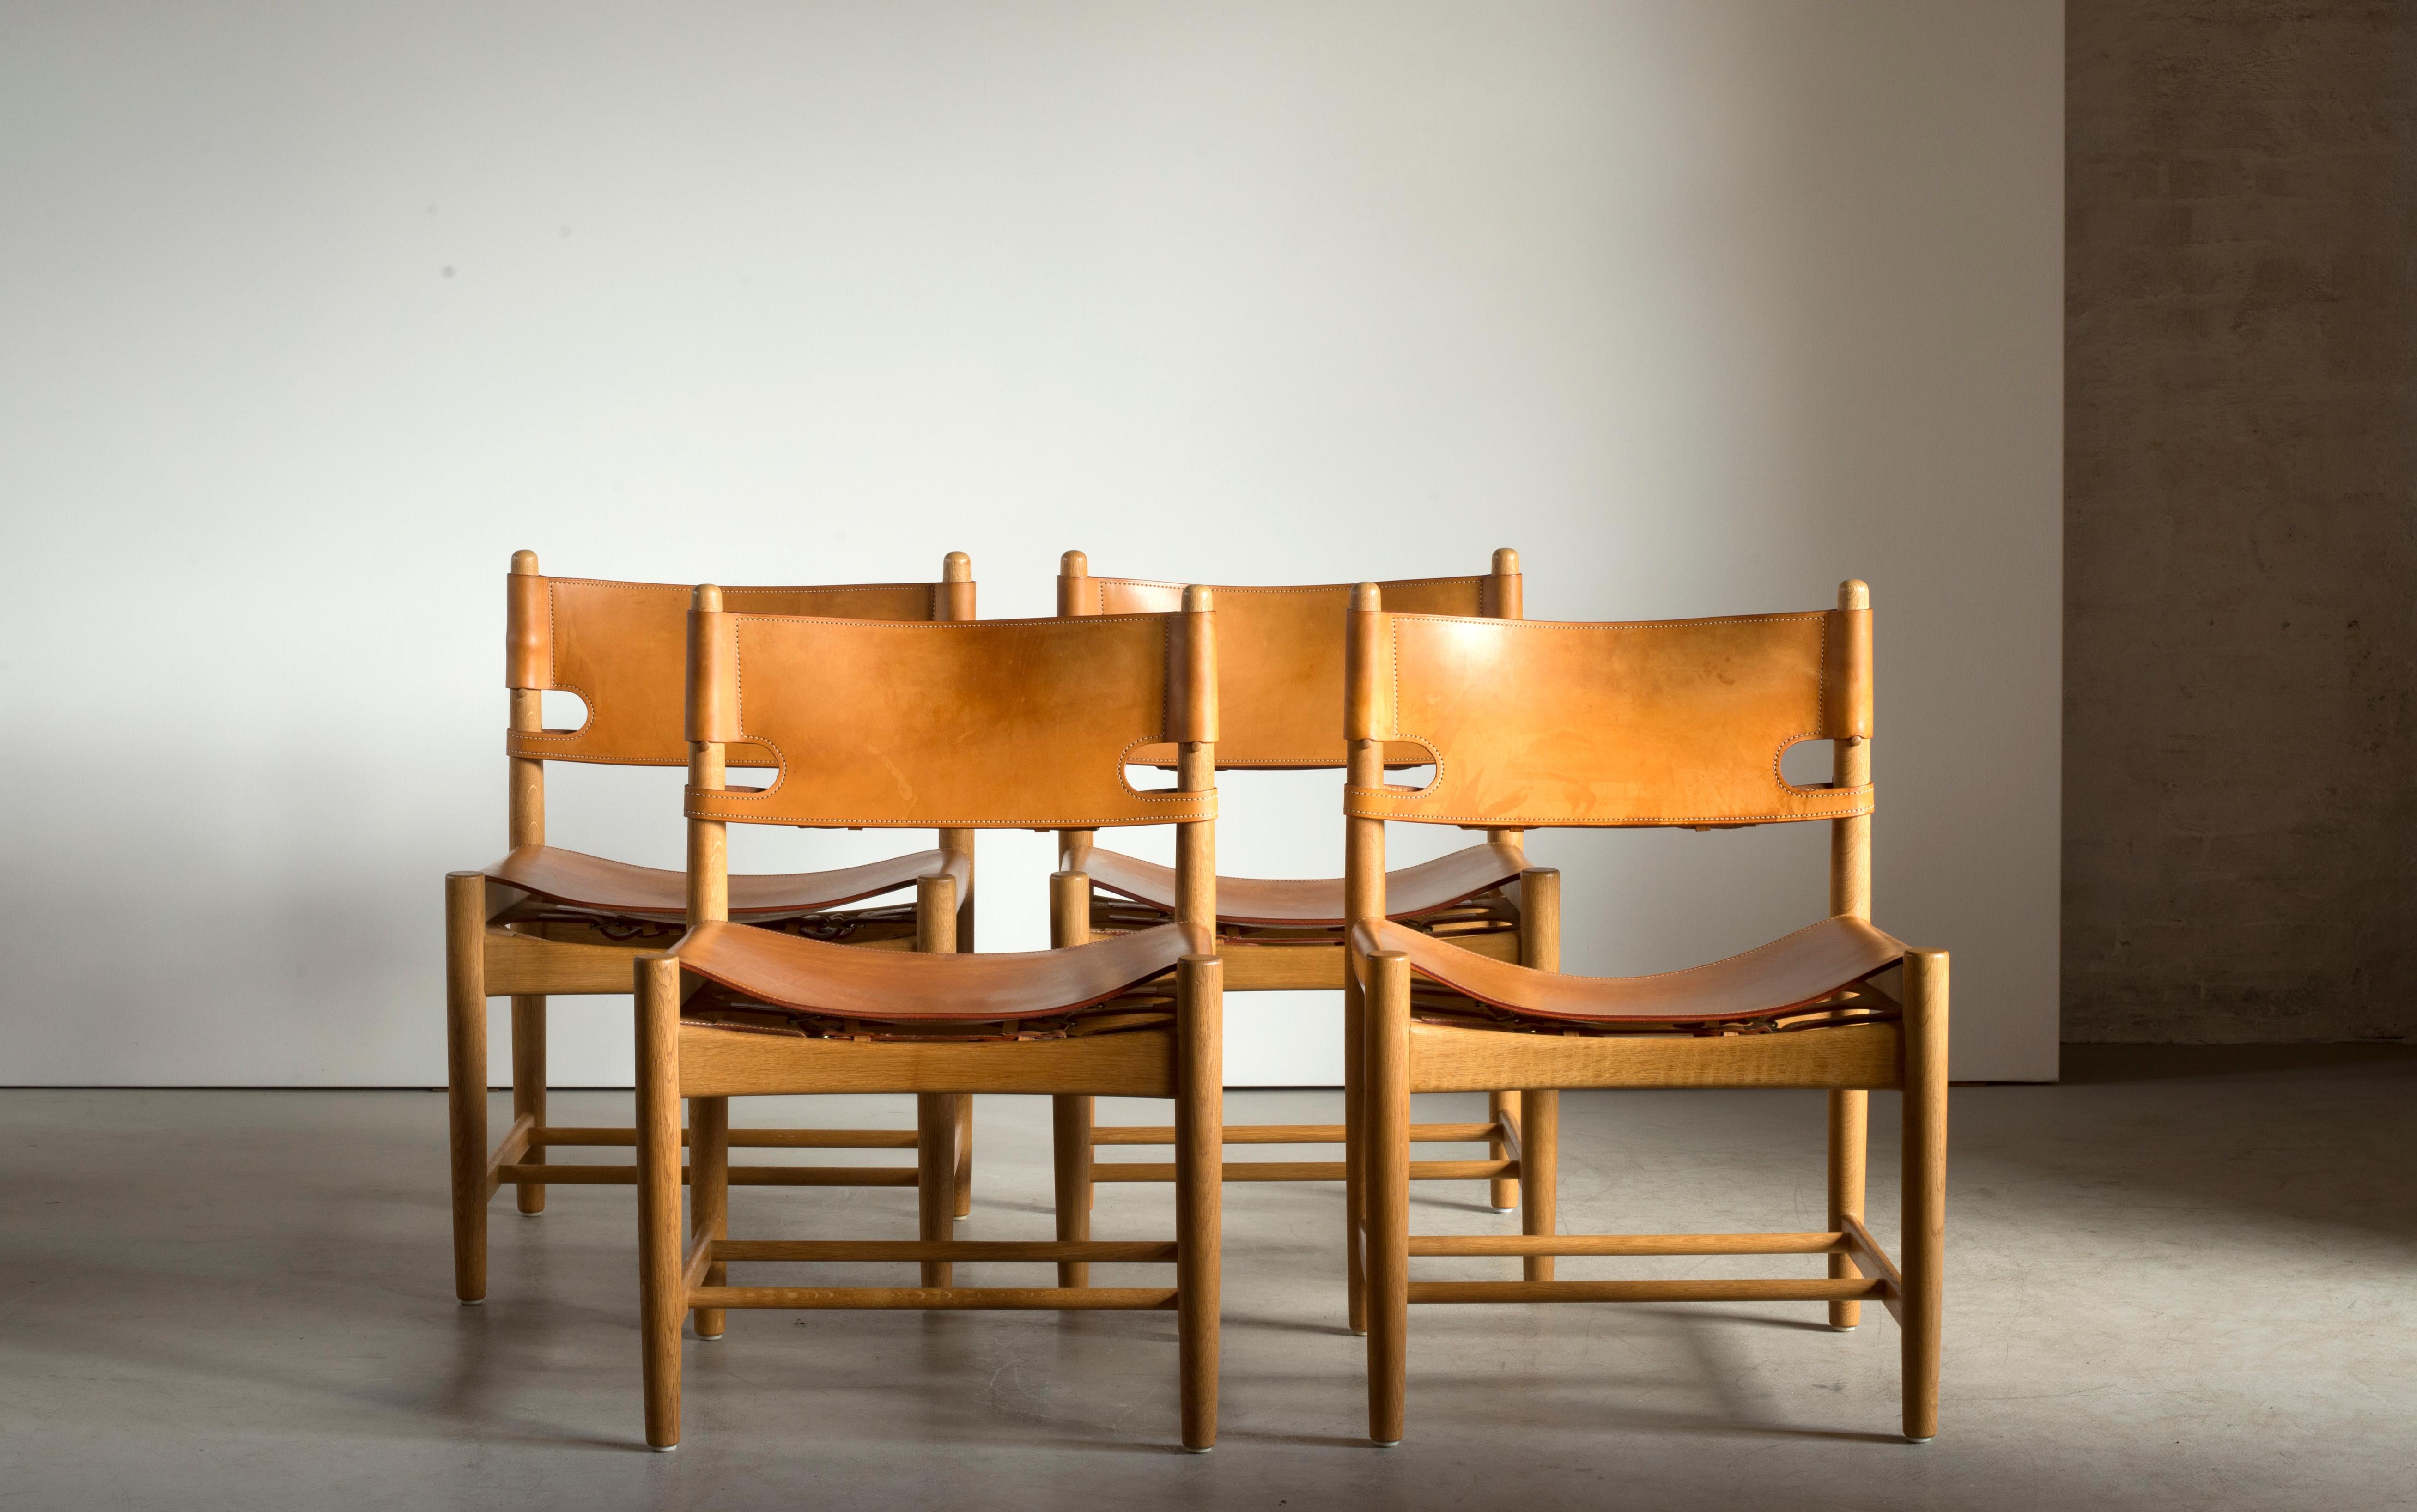 Børge Mogensen set of four dining chairs in oak and natural tanned leather. Executed by Fredericia Furniture.